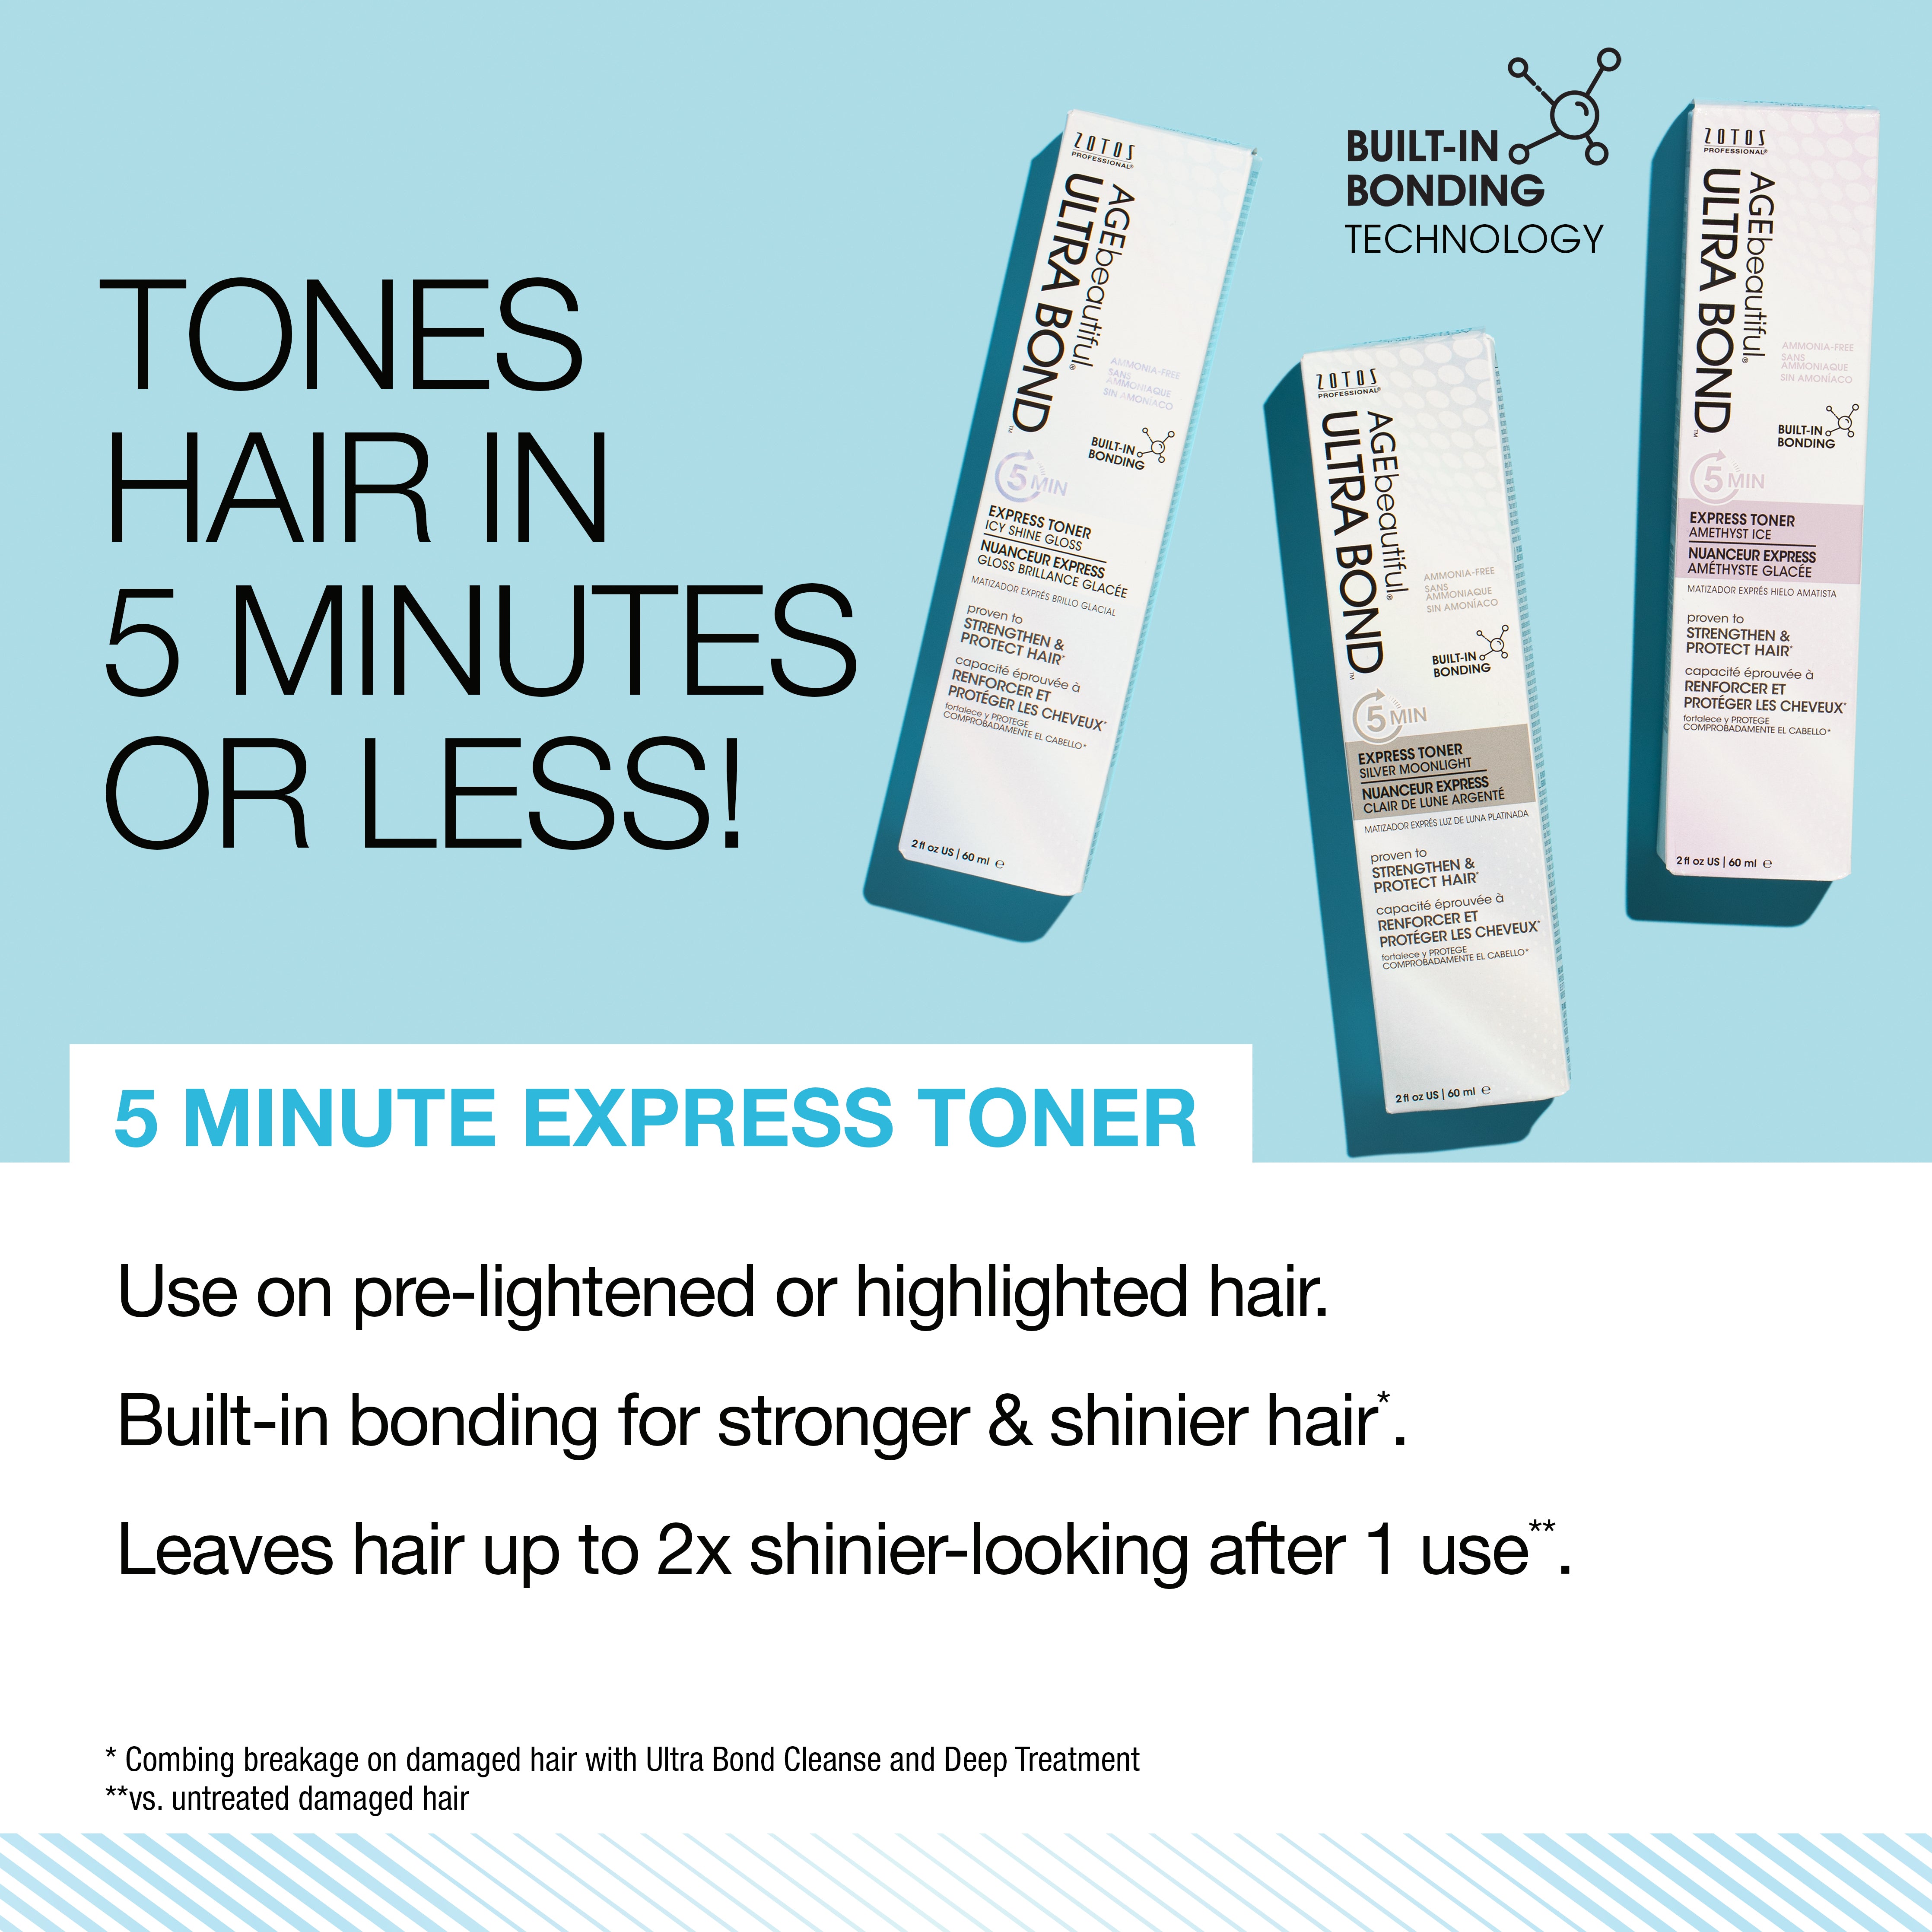 Use on pre-lightened or highlighted hair. Built-in bonding for stronger and shinier hair. Leaves hair up to 2x shinier-looking after 1 use. 